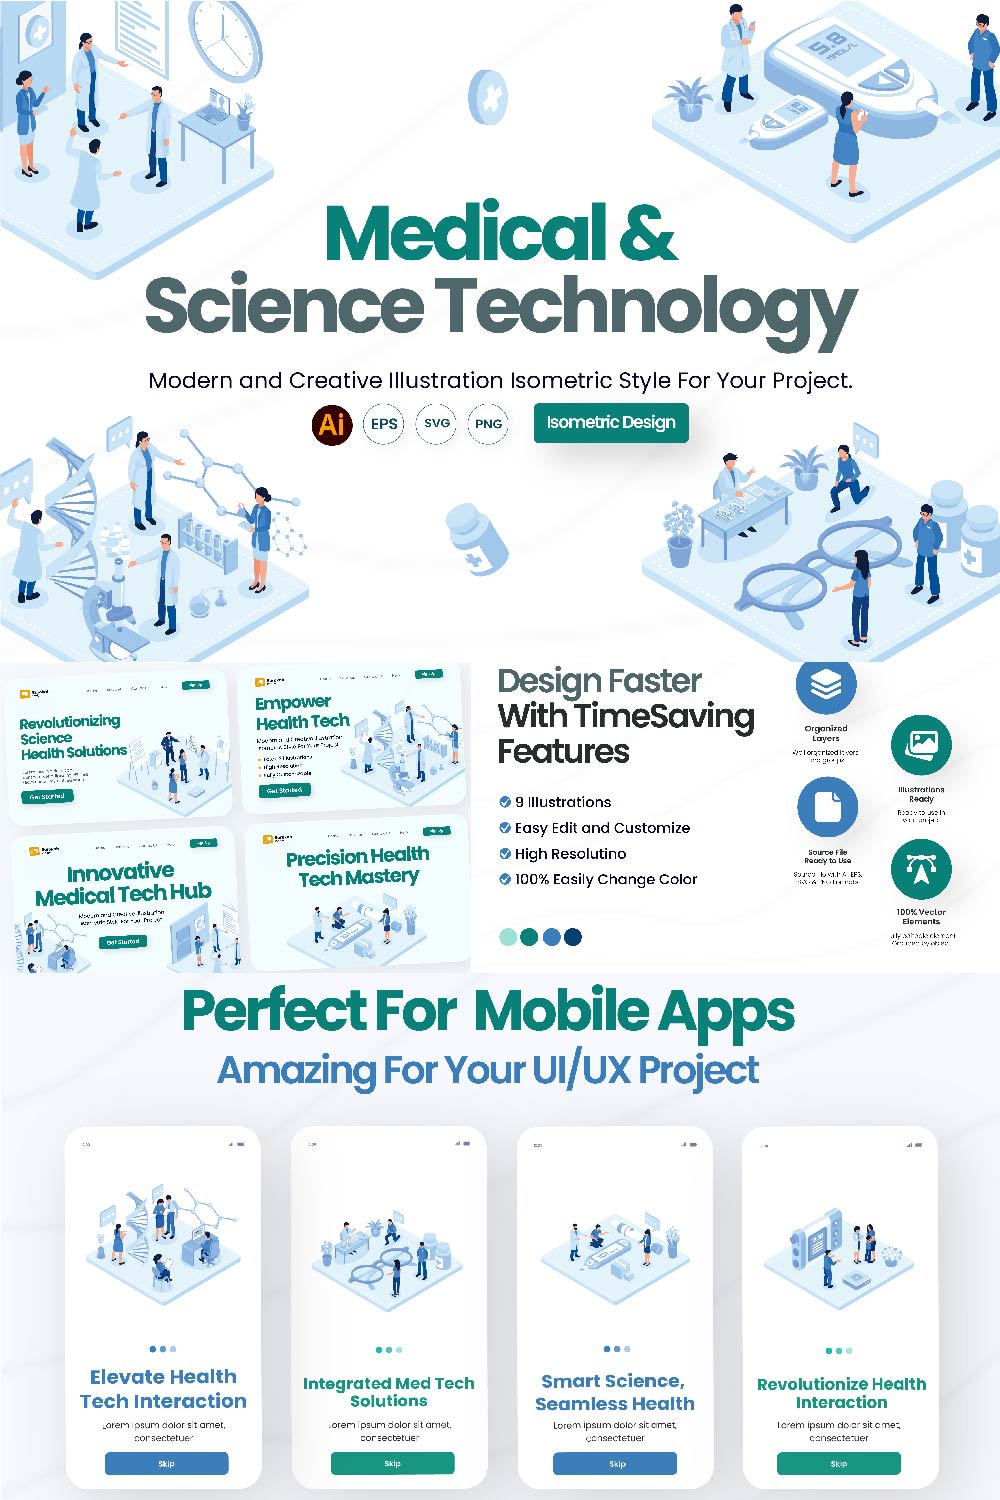 Illustration of Medical & Science Technology pinterest preview image.